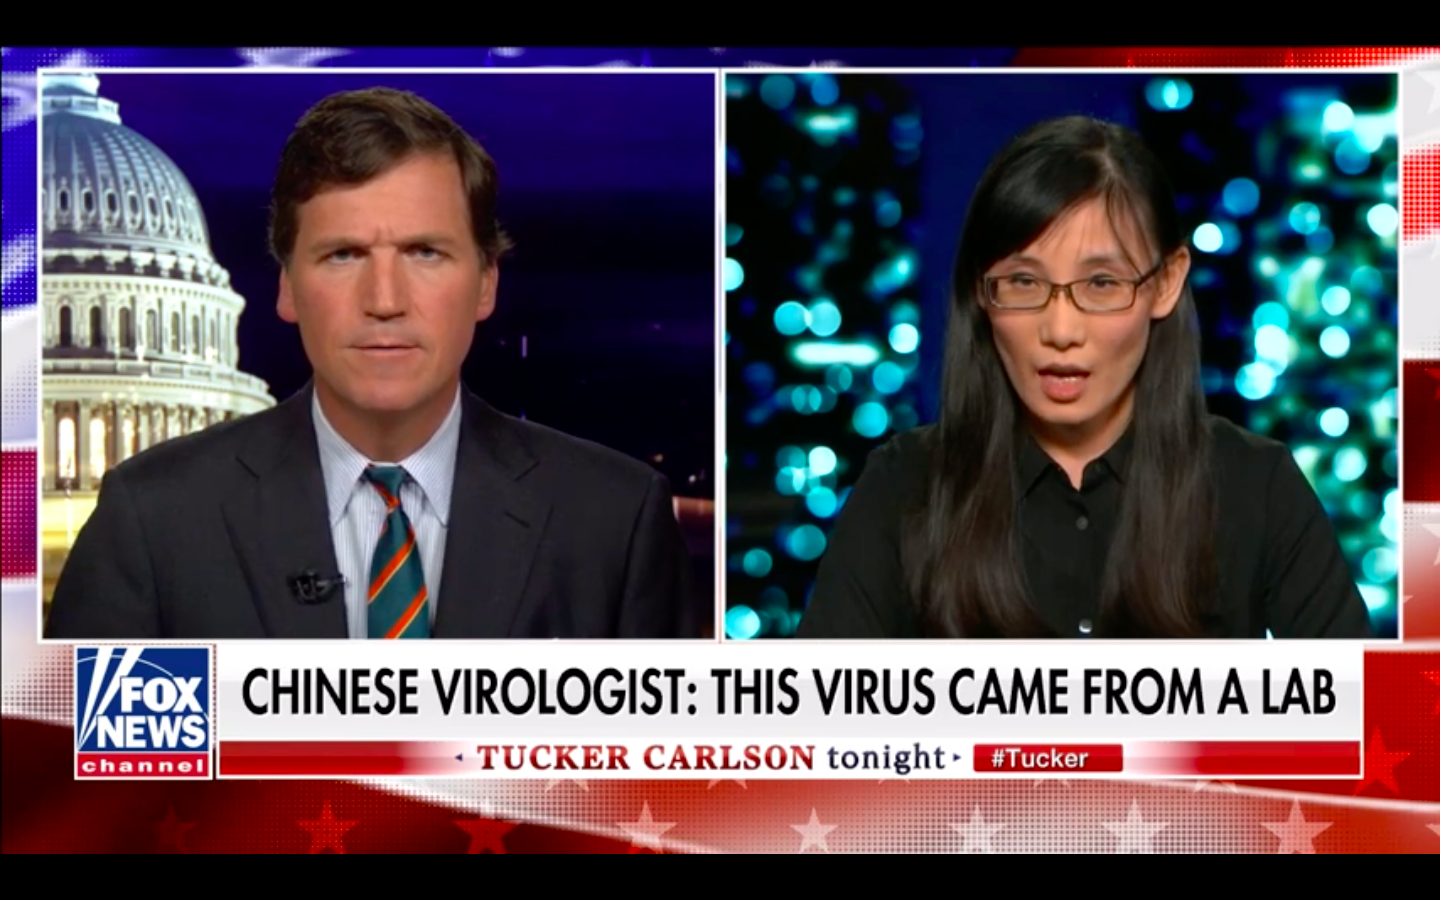 Chinese Virologist Dr. Li-Meng Yan Confirms COVID-19 Created In Lab And Intentionally Released...This Is An Act Of War